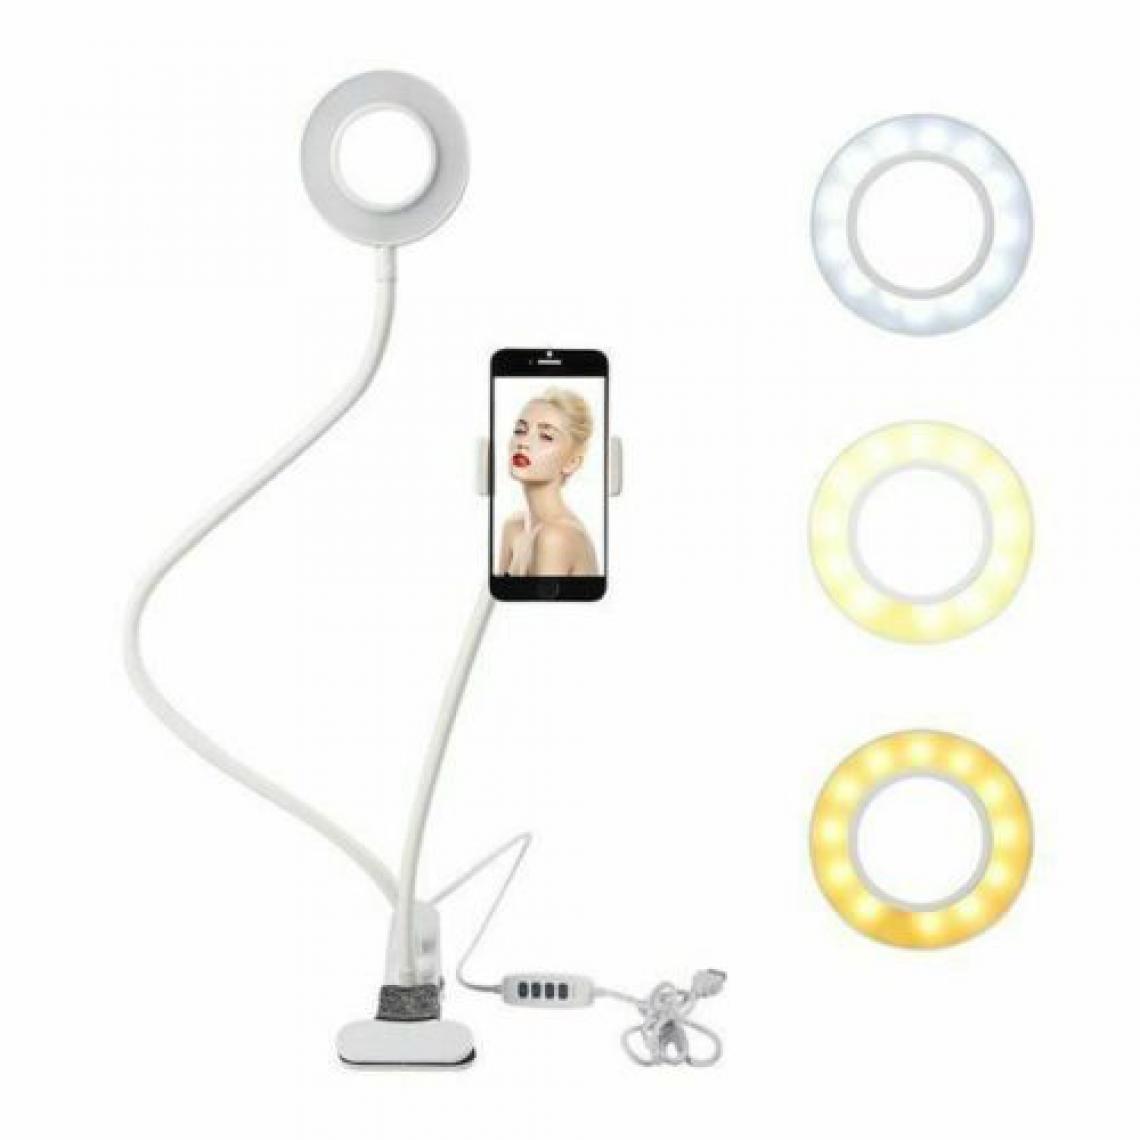 Ozzzo - Stand support bureau selfie led ozzzo blanc pour WIKO Wiew XL - Station d'accueil smartphone